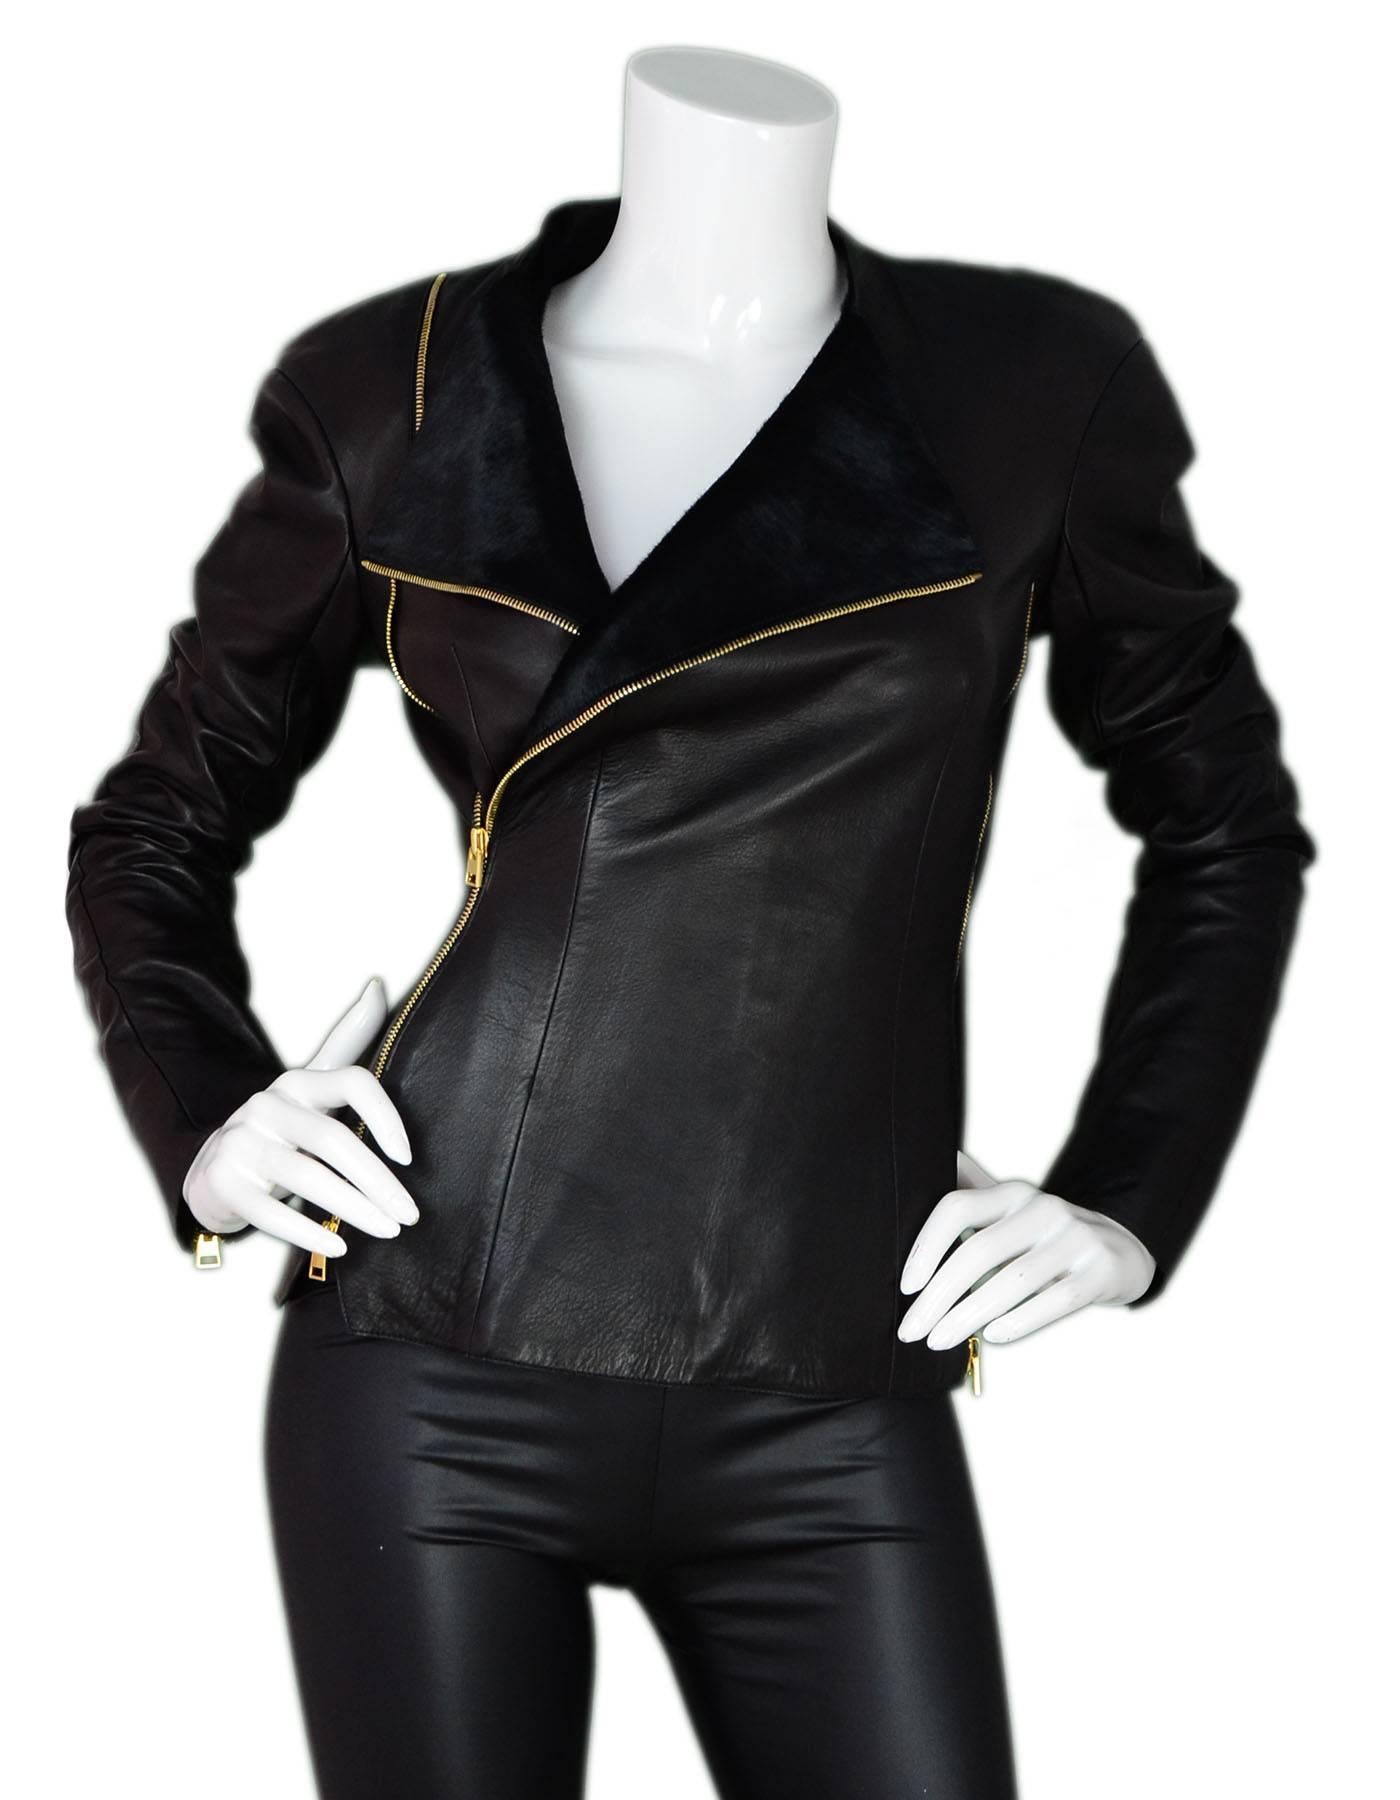 Tom Ford Black Leather & Calf Hair Jacket Sz IT 38

Made In: Italy
Color: Black
Composition: 100% leather
Lining: Black textile
Closure/Opening: Zip closure
Overall Condition: Excellent pre-owned condition
Marked Size: IT38 / US 0
Shoulders: